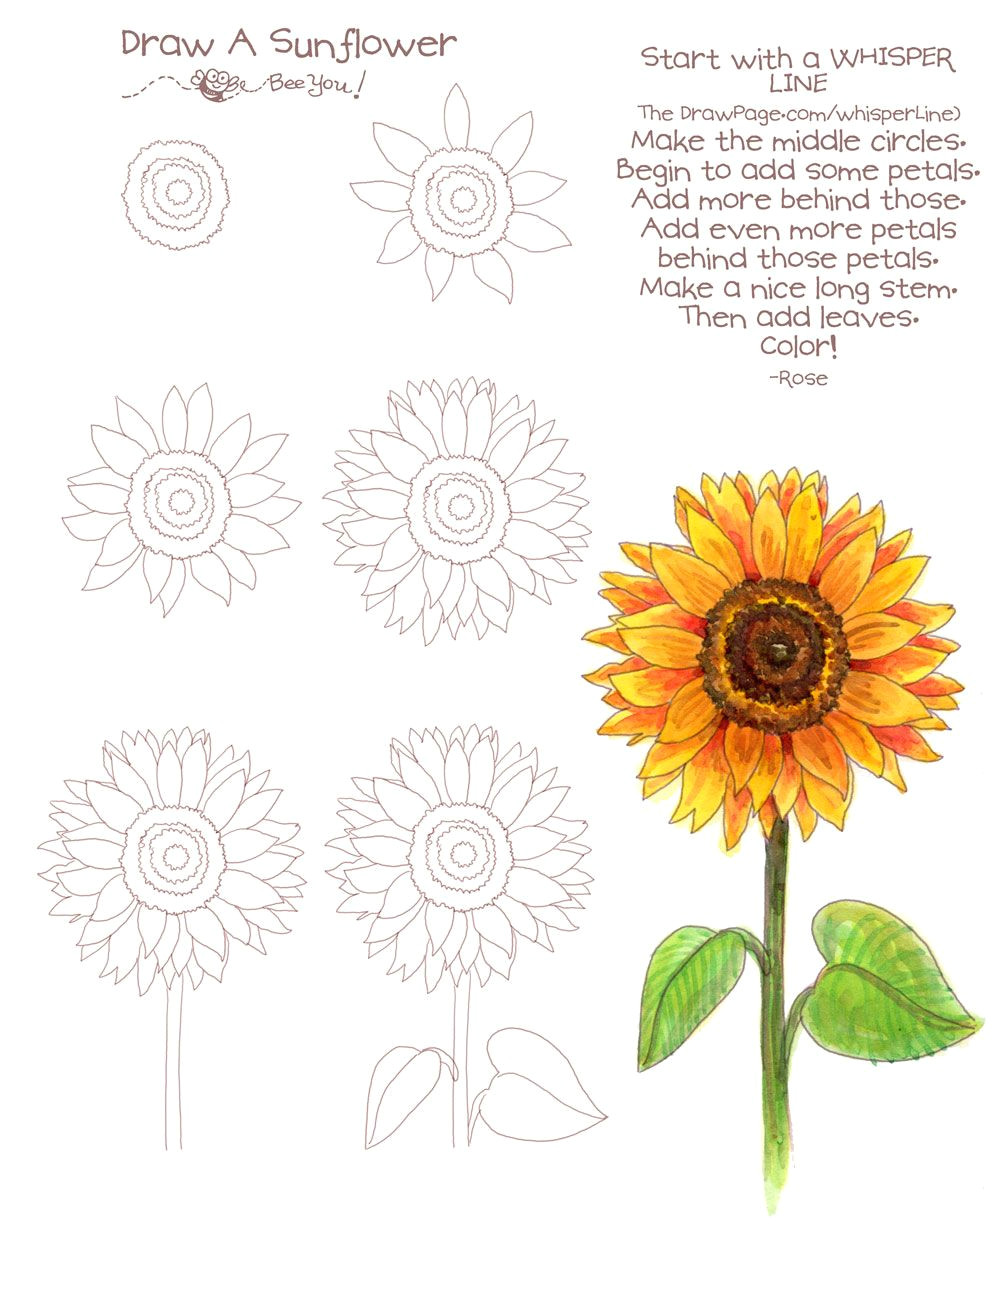 Drawing Ideas Sunflower Drawing A Sunflower Draw Pages From thedrawpage Com Pinterest